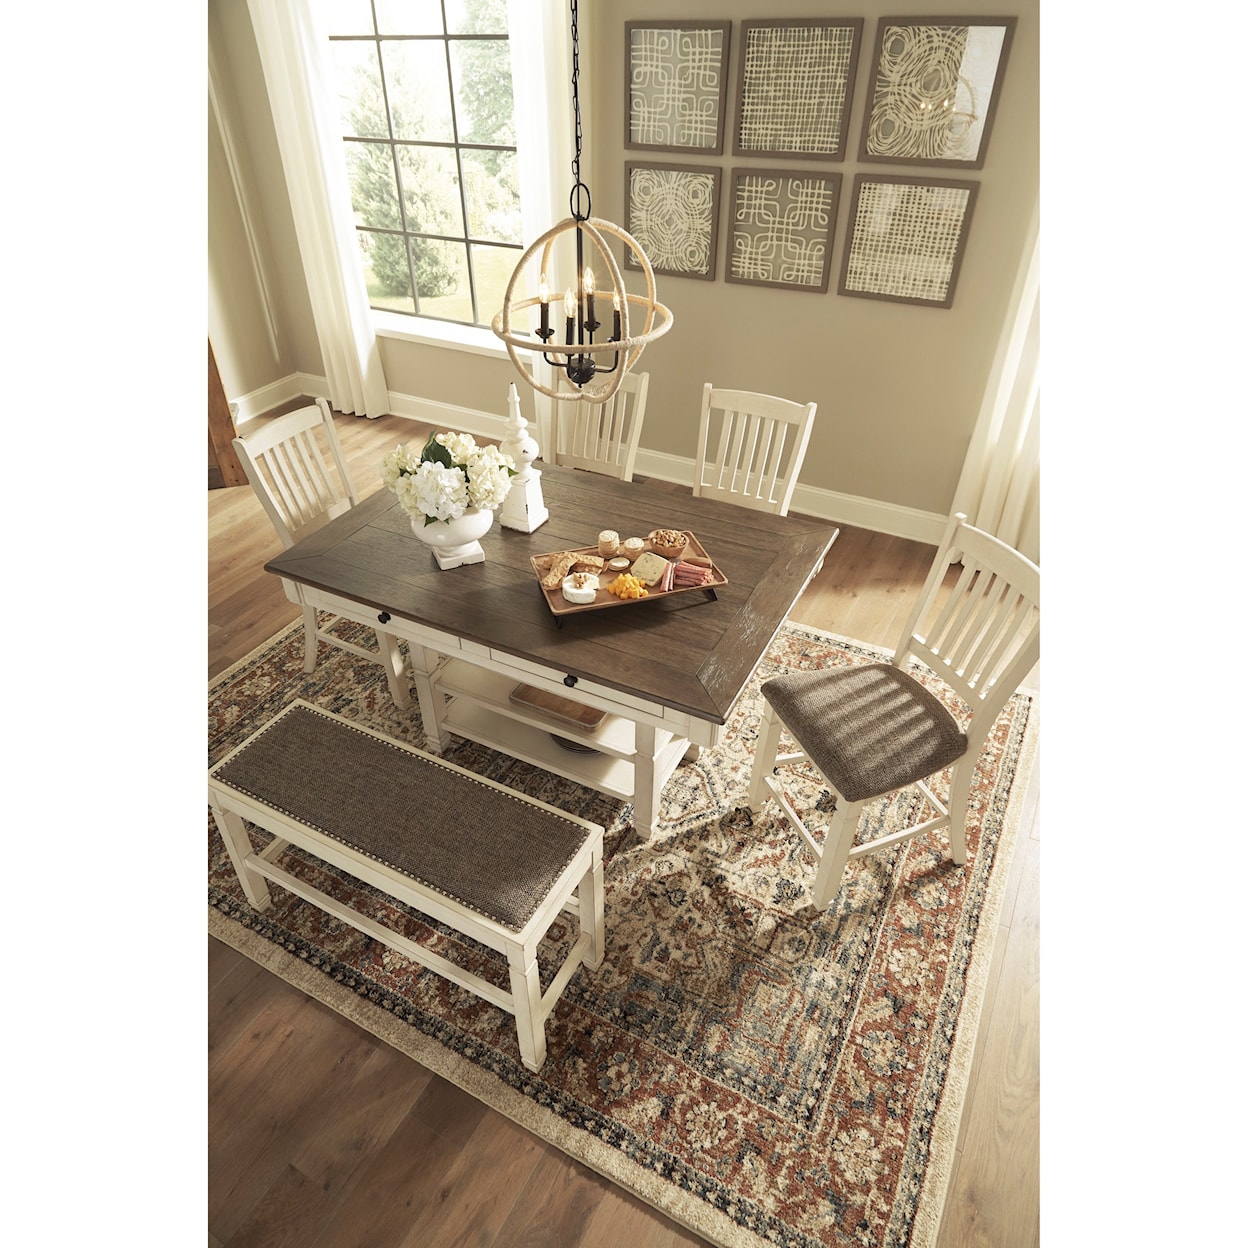 Ashley Signature Design Bolanburg 6-Piece Counter Table Set with Bench